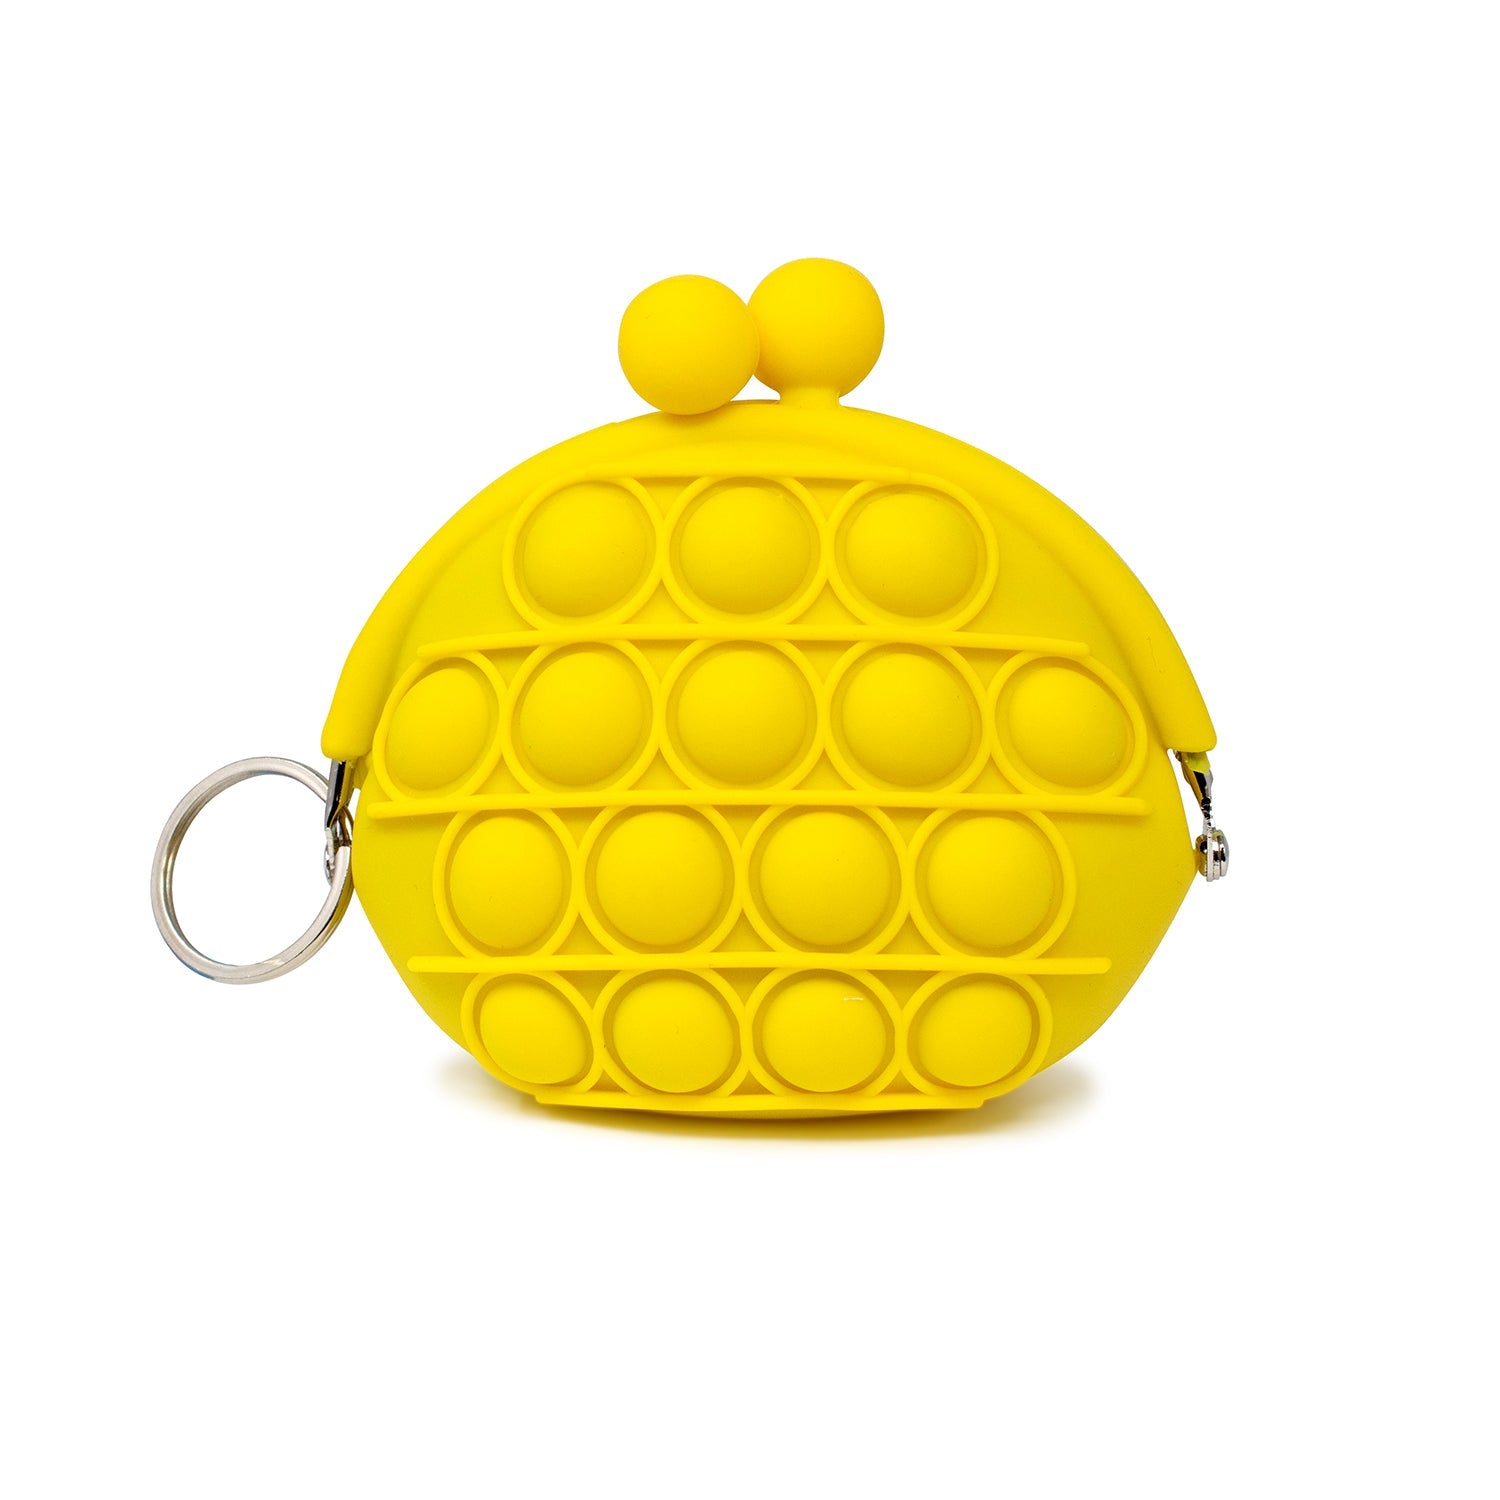 Mini Bubble Pop Clasp Purse, yellow. This fidget toy coin purse uses high quality silicone rubber materials. Not just a toy, it is also practical coin purse that not only can store small items, but also a sensory toy. Just pressing the bubble down makes a big, crisp popping sound! Fashionable and super cute design for kids, it can be used as a fashion accessory or coin purse you can store change, tissues, snacks, lipstick, keys and more inside.